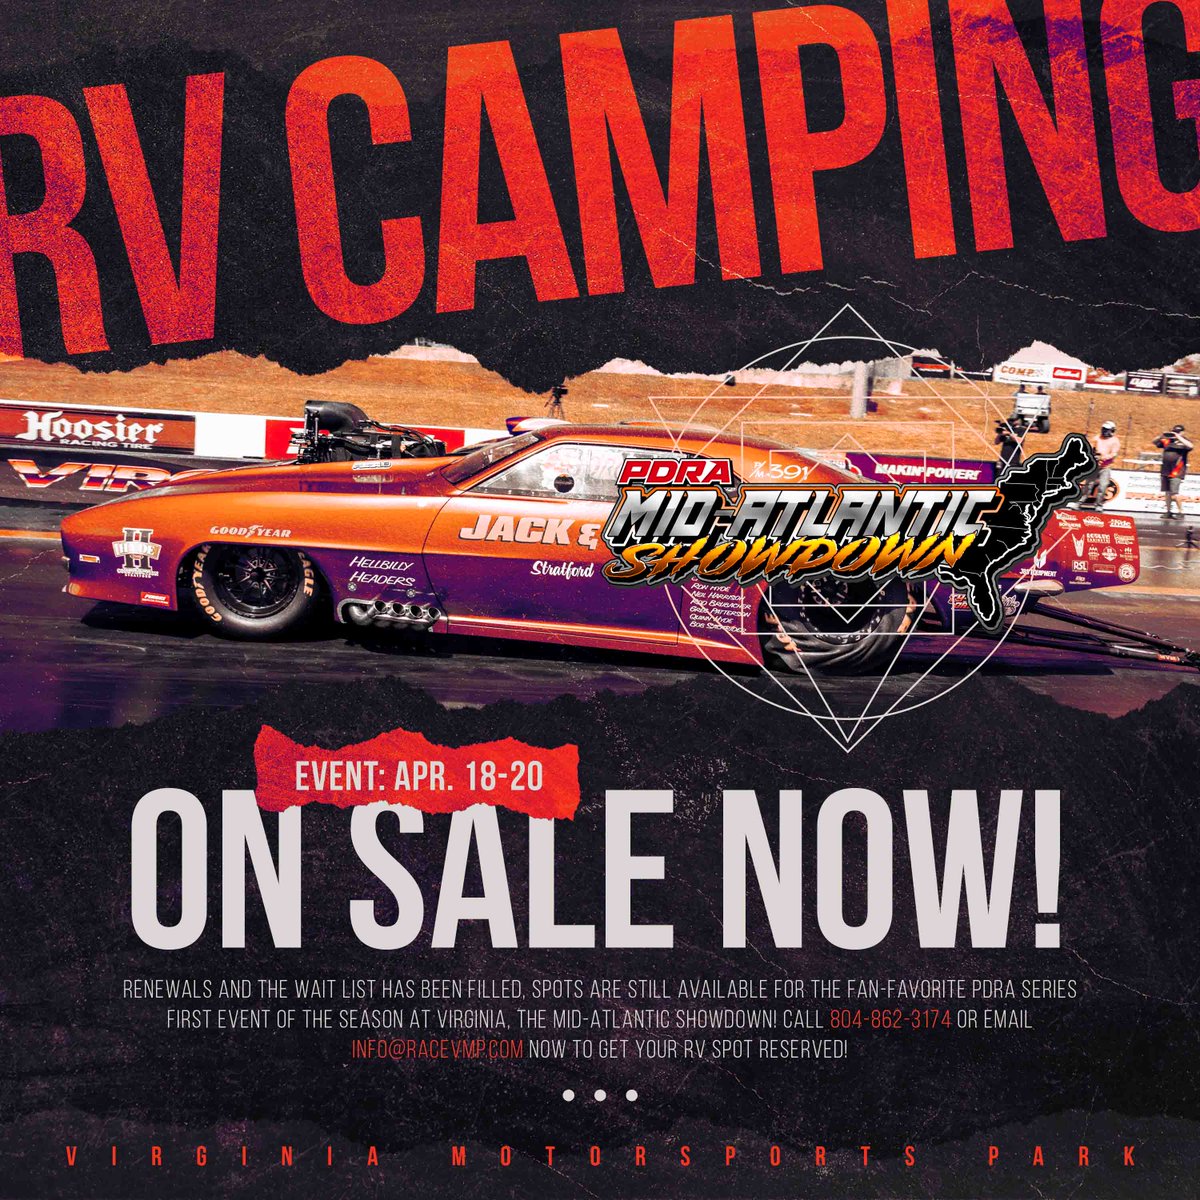 RV Camping spots are still available for next weekend's PDRA Mid-Atlantic Showdown. Don't miss out! Call today and get yours reserved, 804-862-3174.